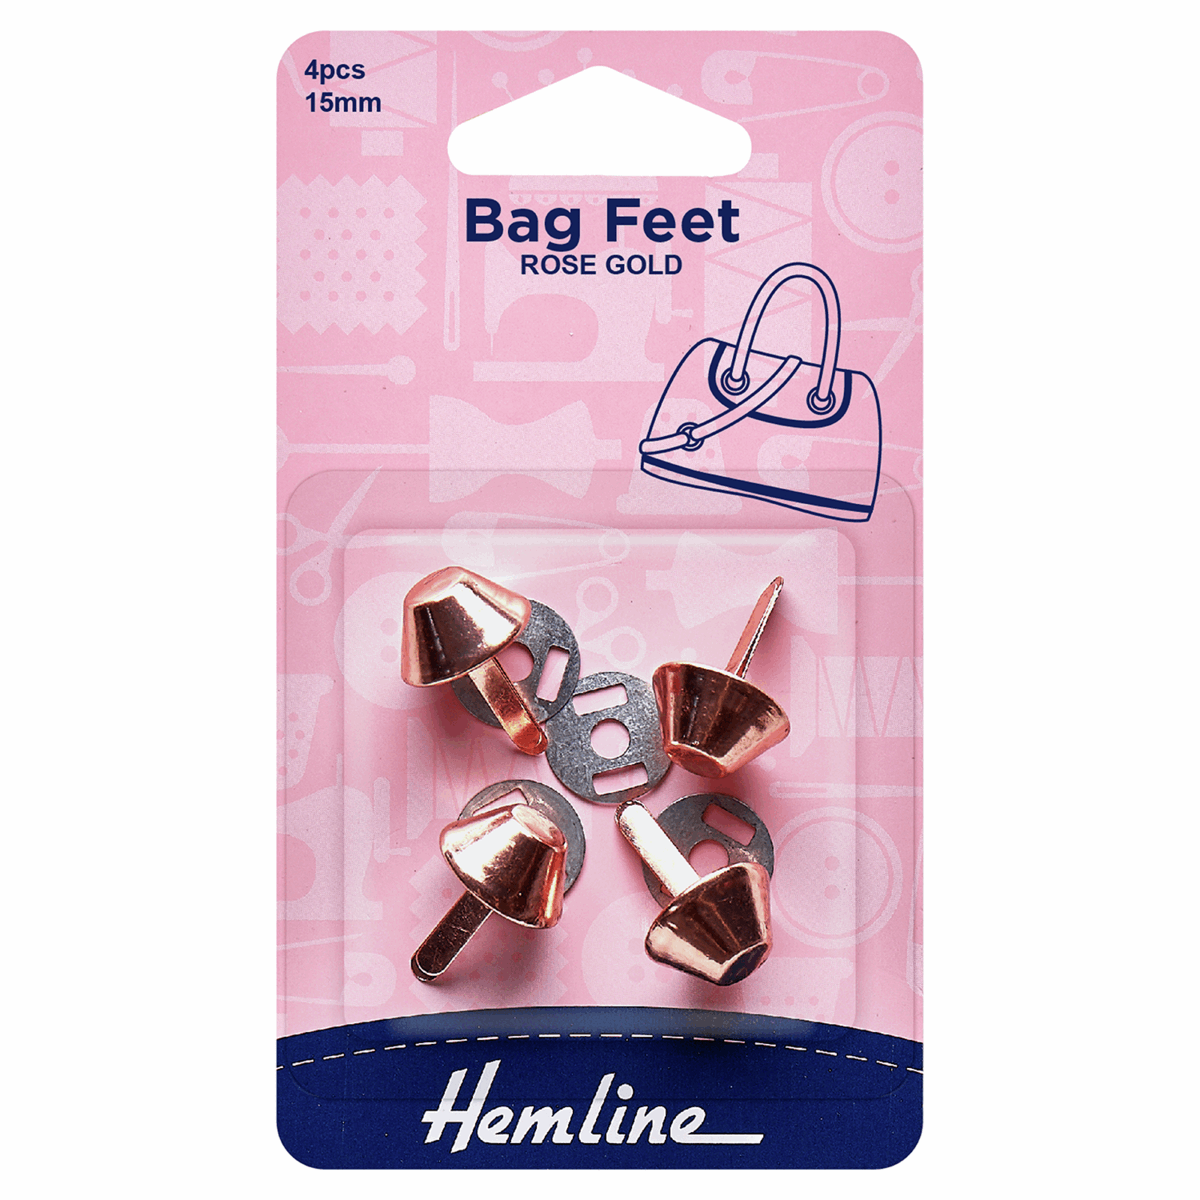 Bag Feet Base Nails: 15mm: Rose Gold: 4 Pieces